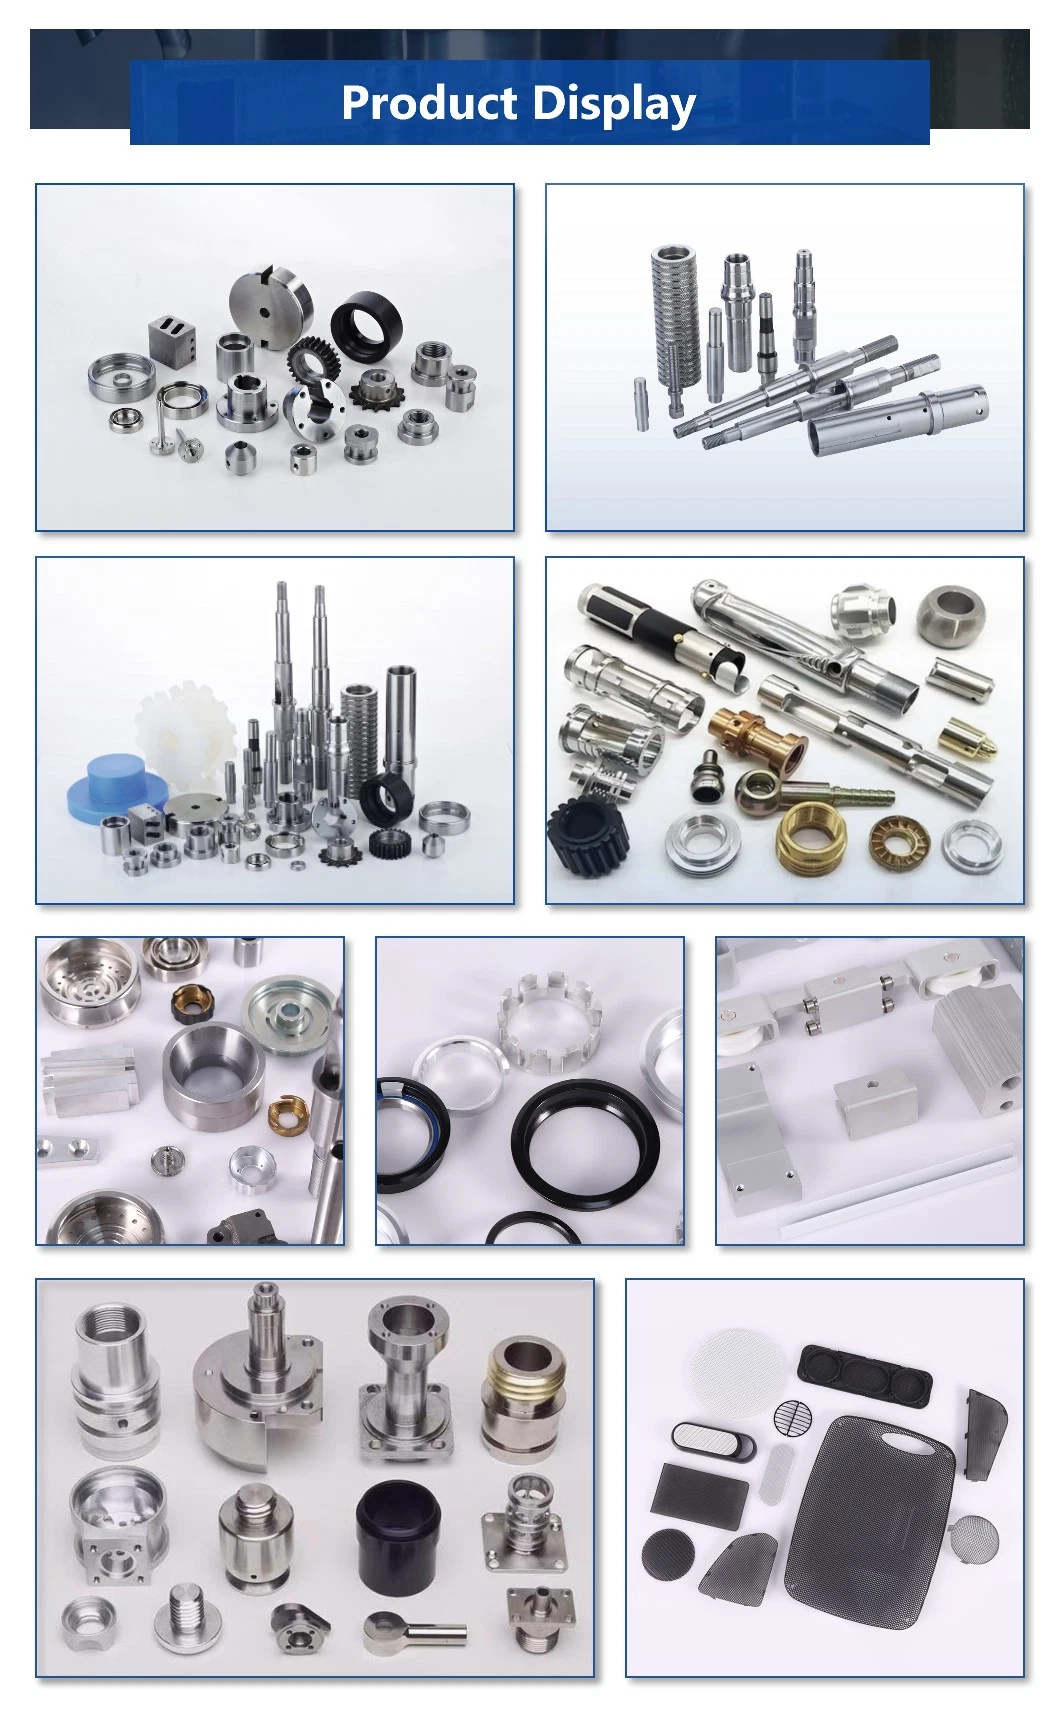 OEM Aluminum/Brass/Copper/Stainless Steel/Iron/Titanium Alloy/Plastic CNC Machining (Turning, Milling, Drilling, Tapping, Grinding) Metal Projector Accessories